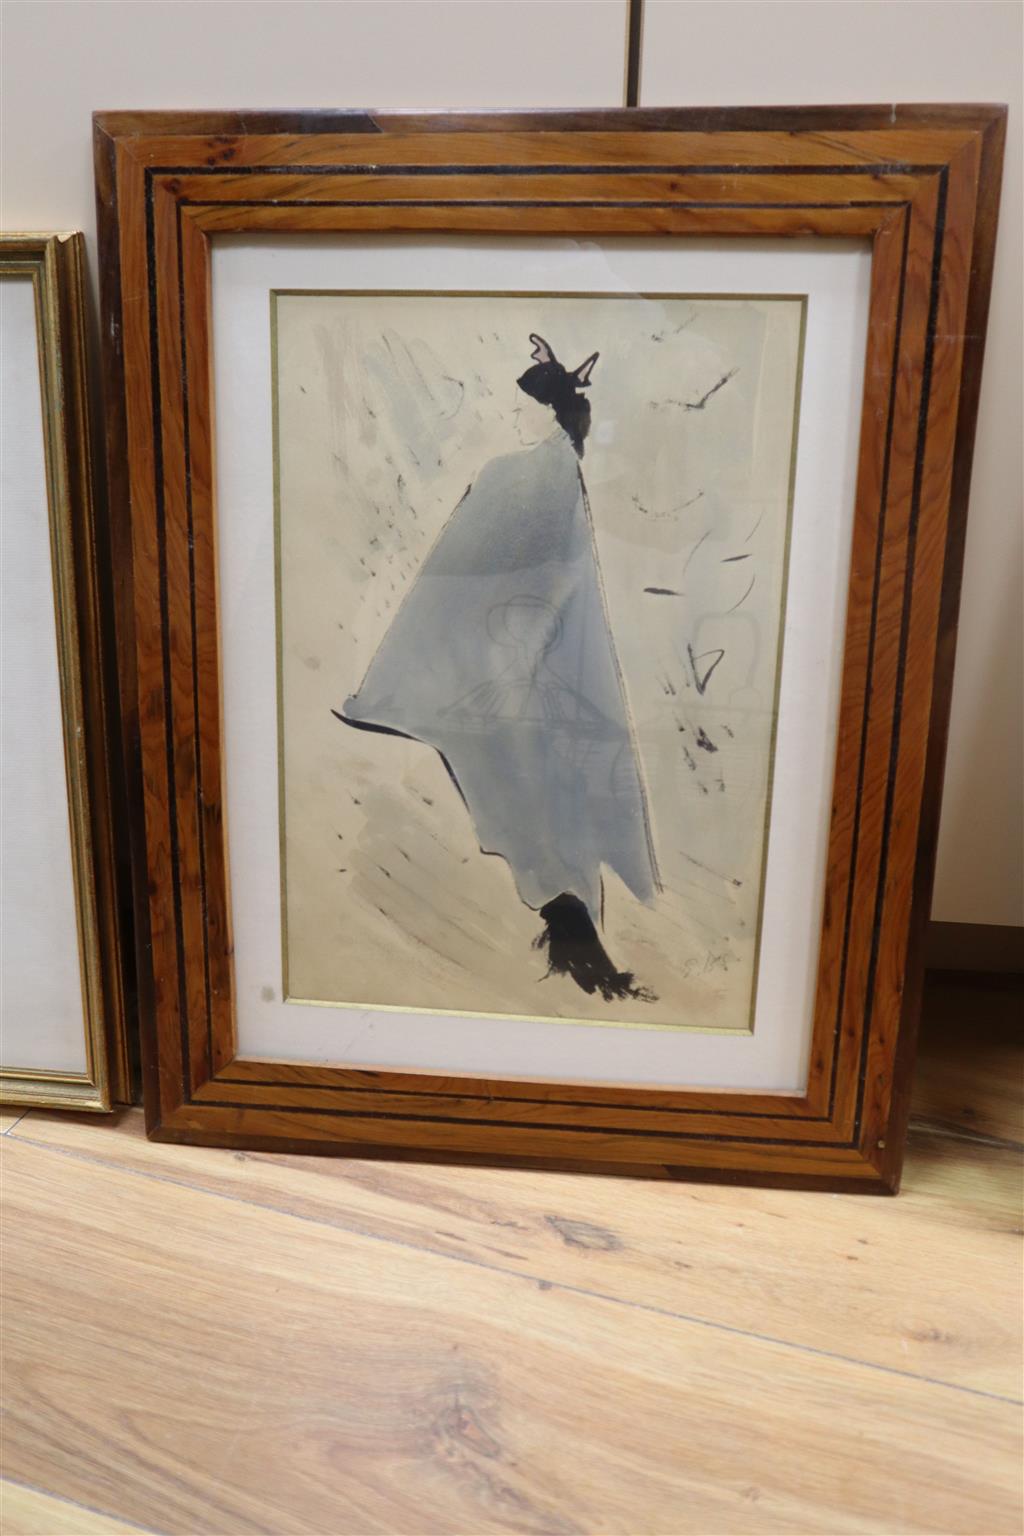 Elinor Bellingham Smith (1906-1988), ink and watercolour, The Blue Cape, signed, with Gallery label verso, 33 x 22.5cm